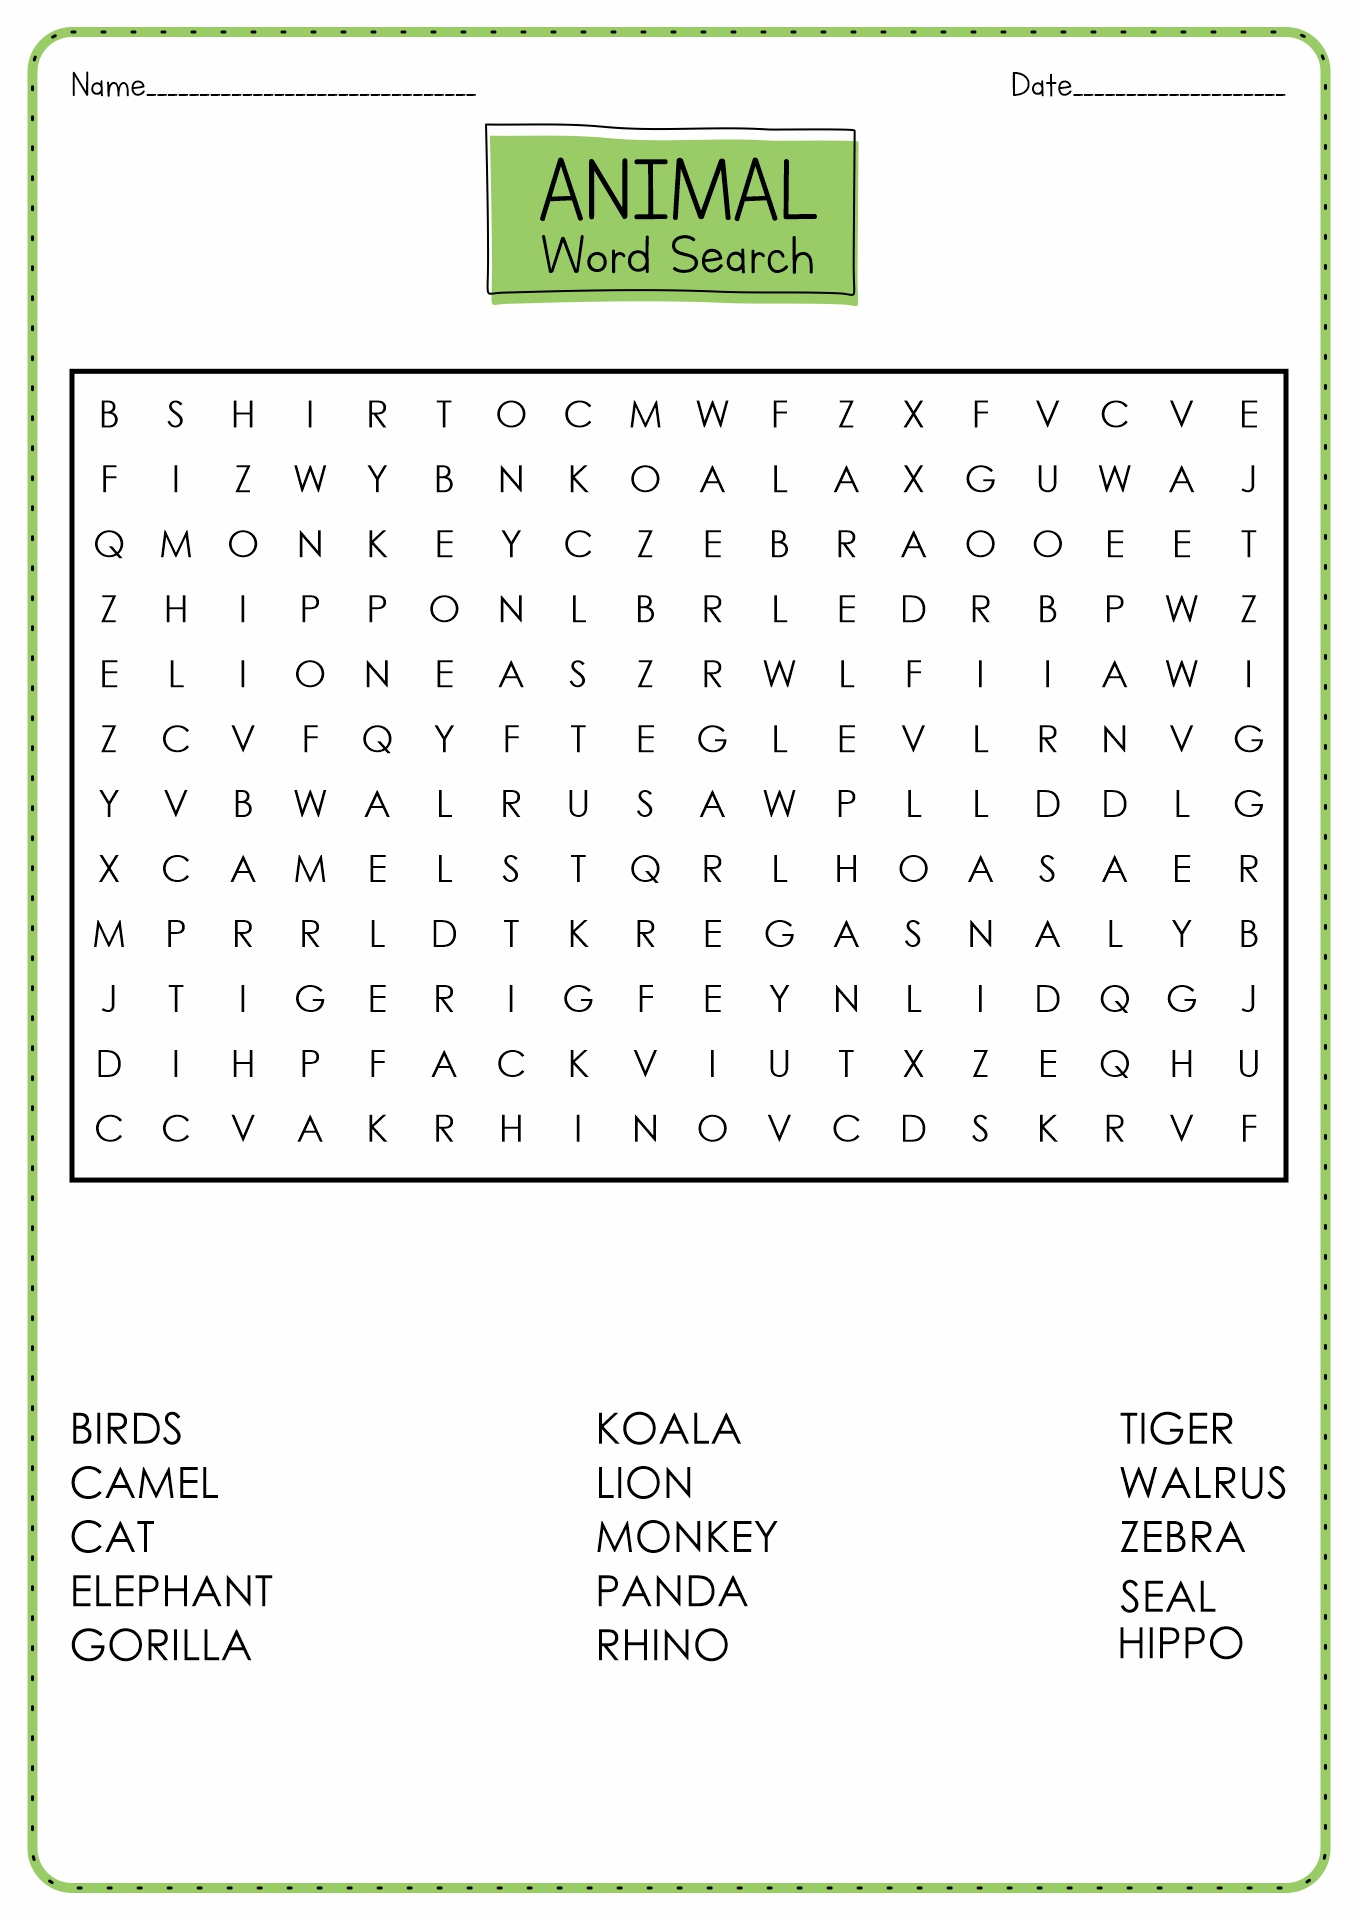 Animal Word Search Puzzles Printable Image